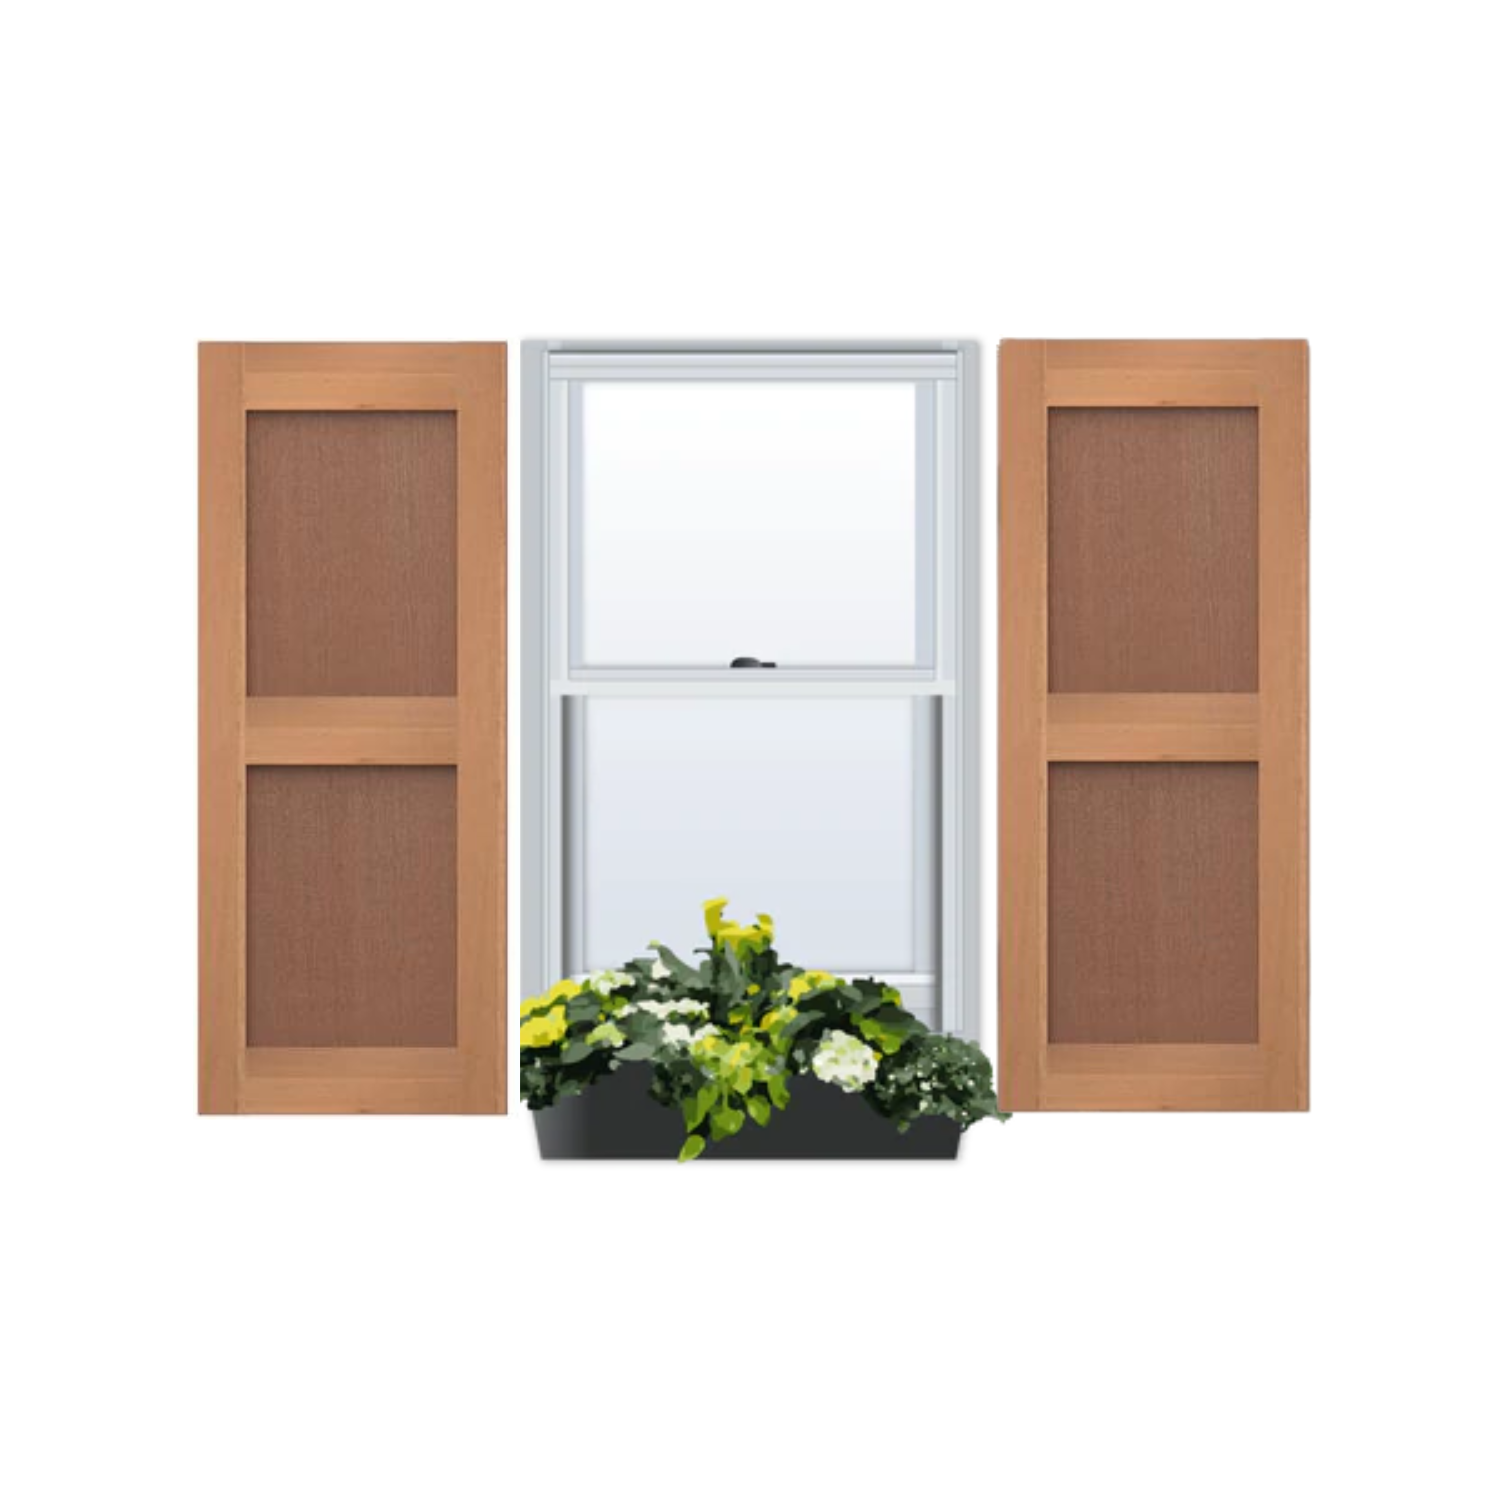 Cedar | Flat Panel Shaker Style with Composite Panel Exterior Shutters | Two Equal Sections | 1 Pair